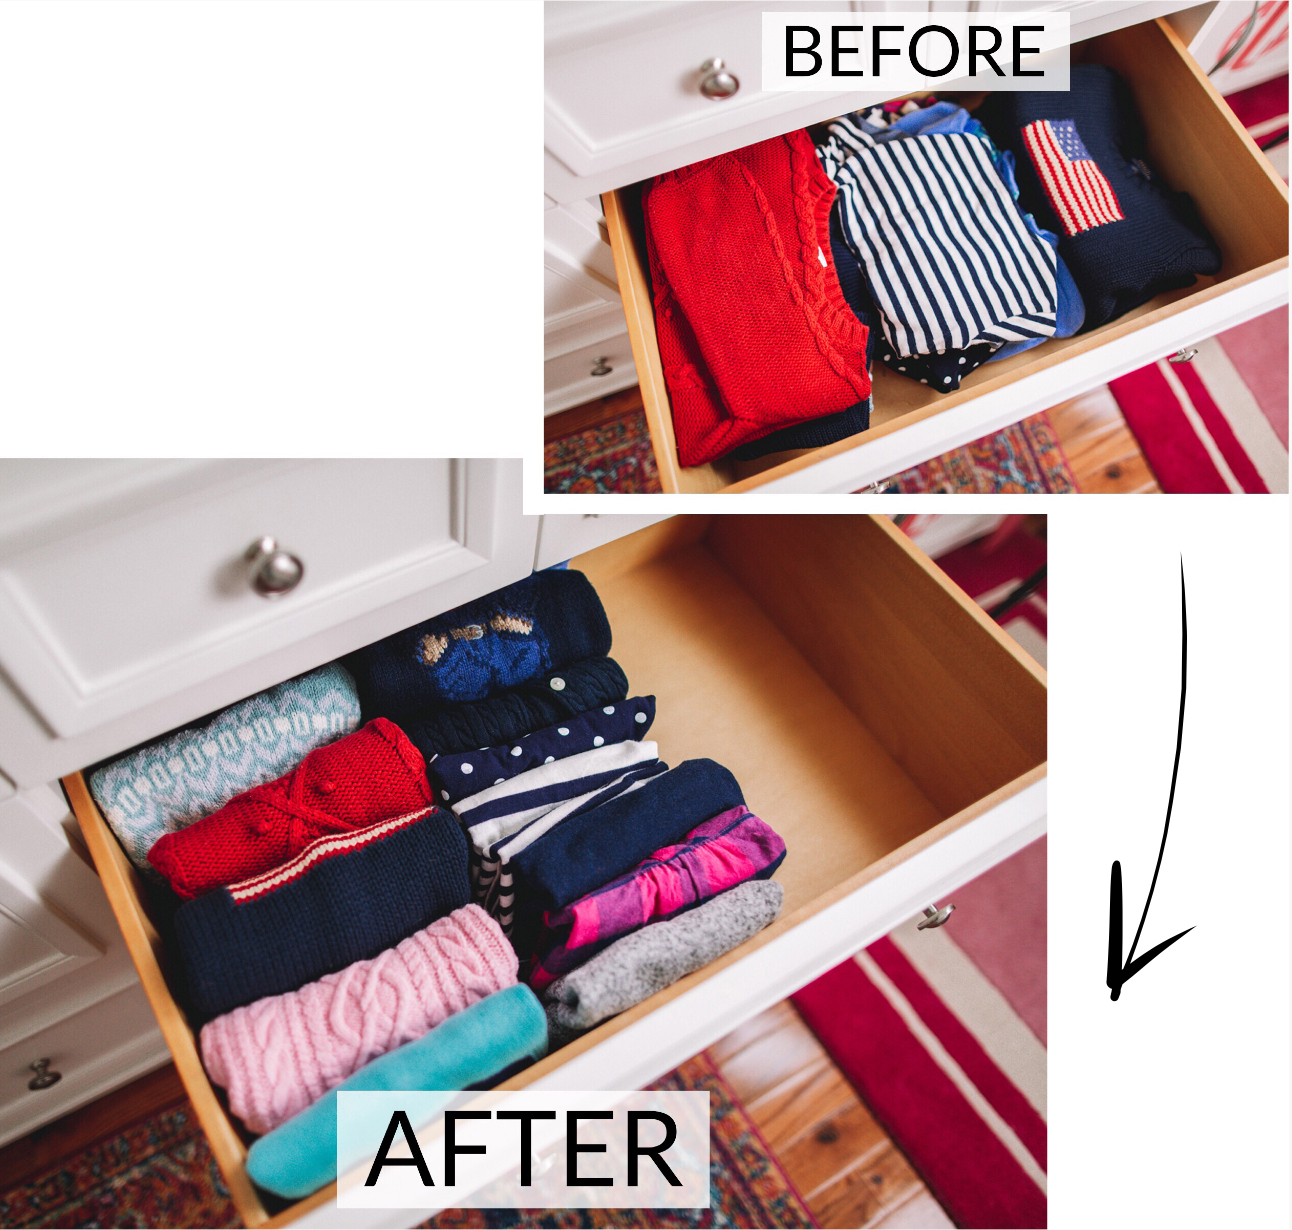 How to KonMari Kids' Room - Before and After